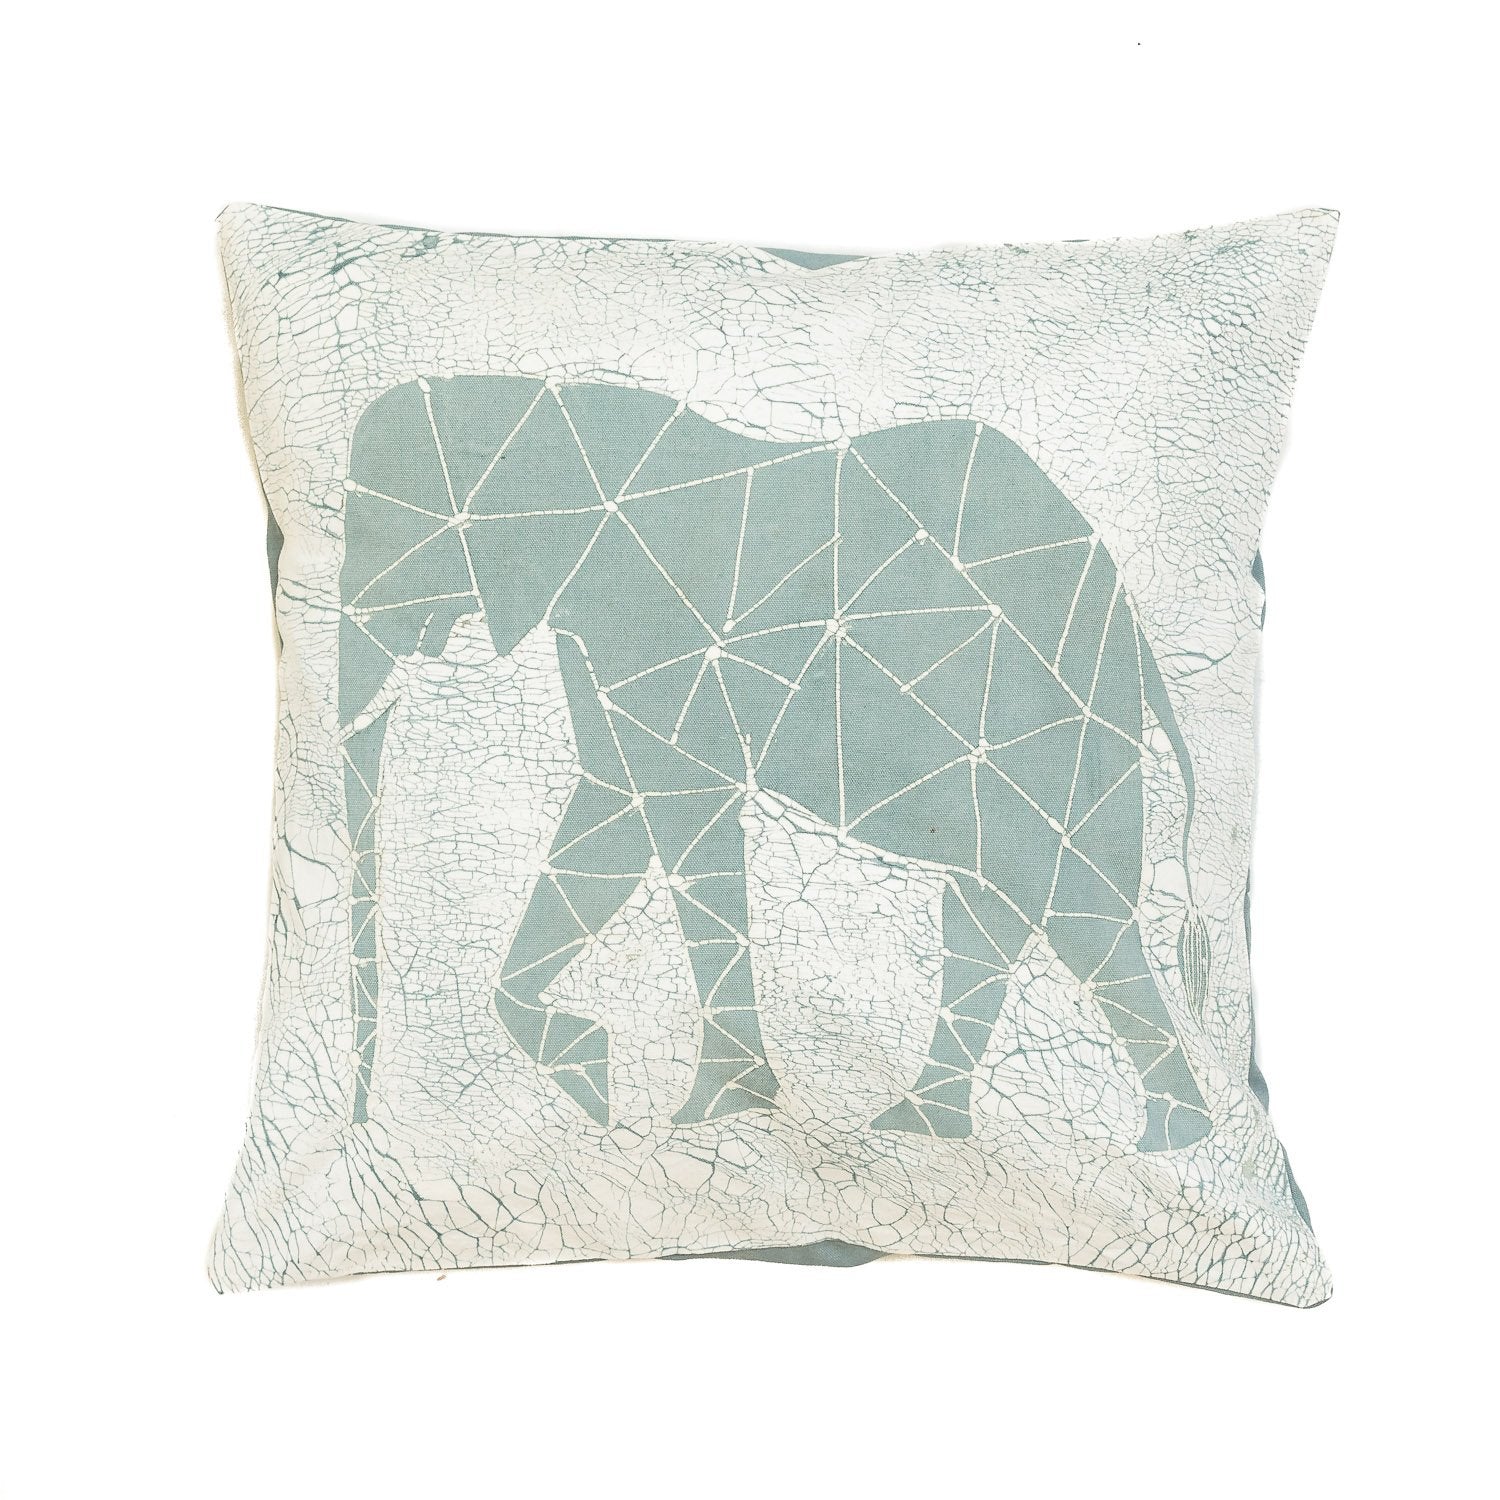 Crackle Animals Elephant Light Blue Cushion Cover - Handmade by TRIBAL TEXTILES - Handcrafted Home Decor Interiors - African Made